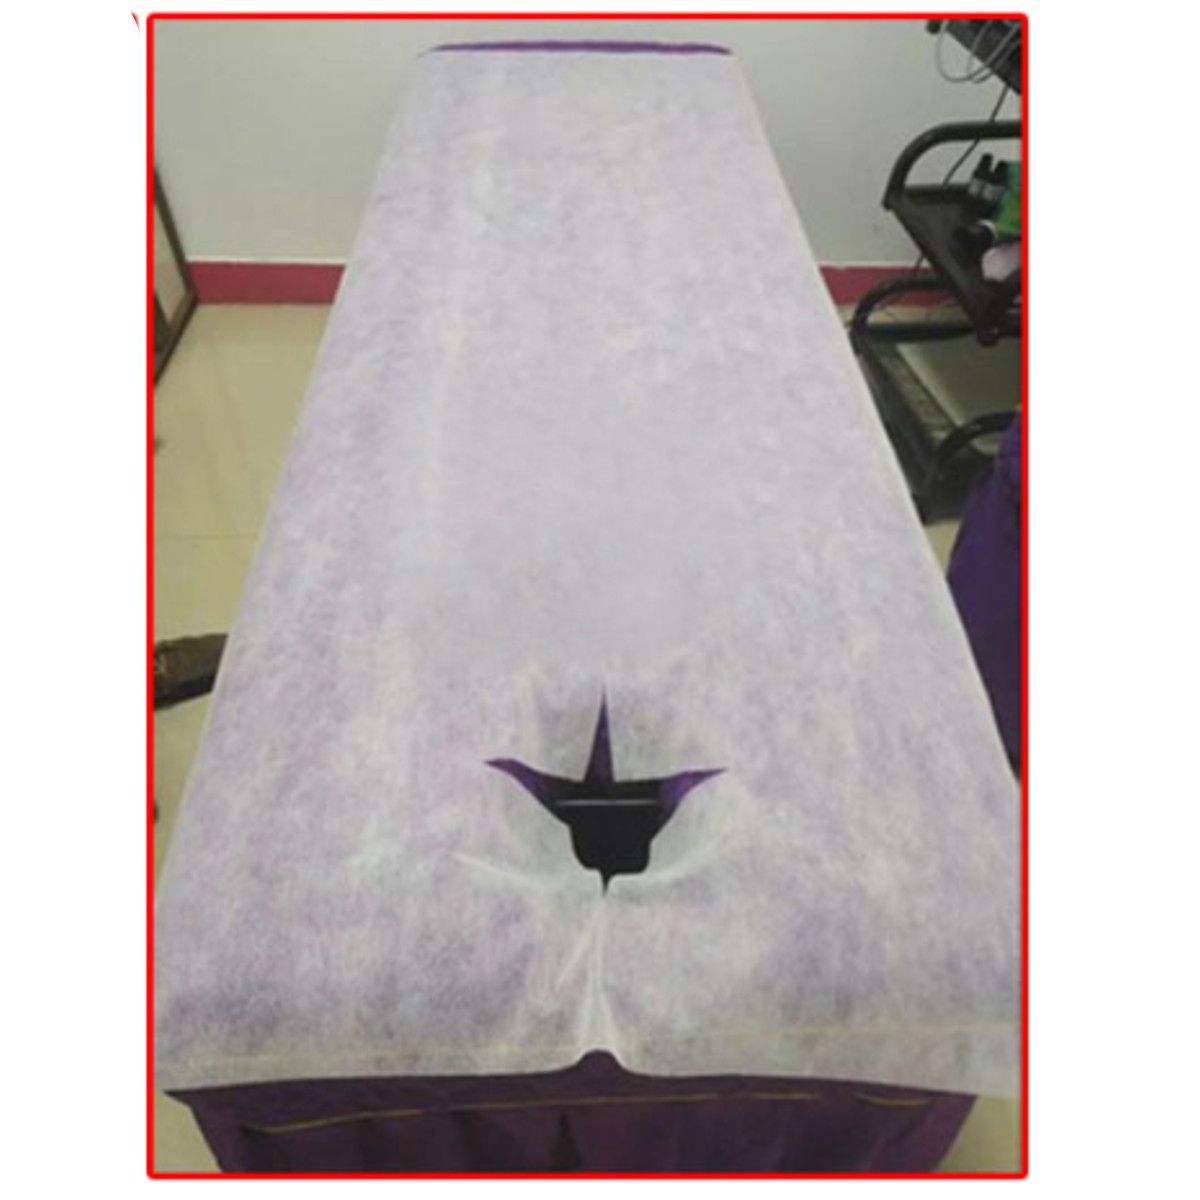 180x80cm-50PcsRoll-Disposable-Massage-Table-Bed-Cover-Sheet-Beauty-Waxing-1737148